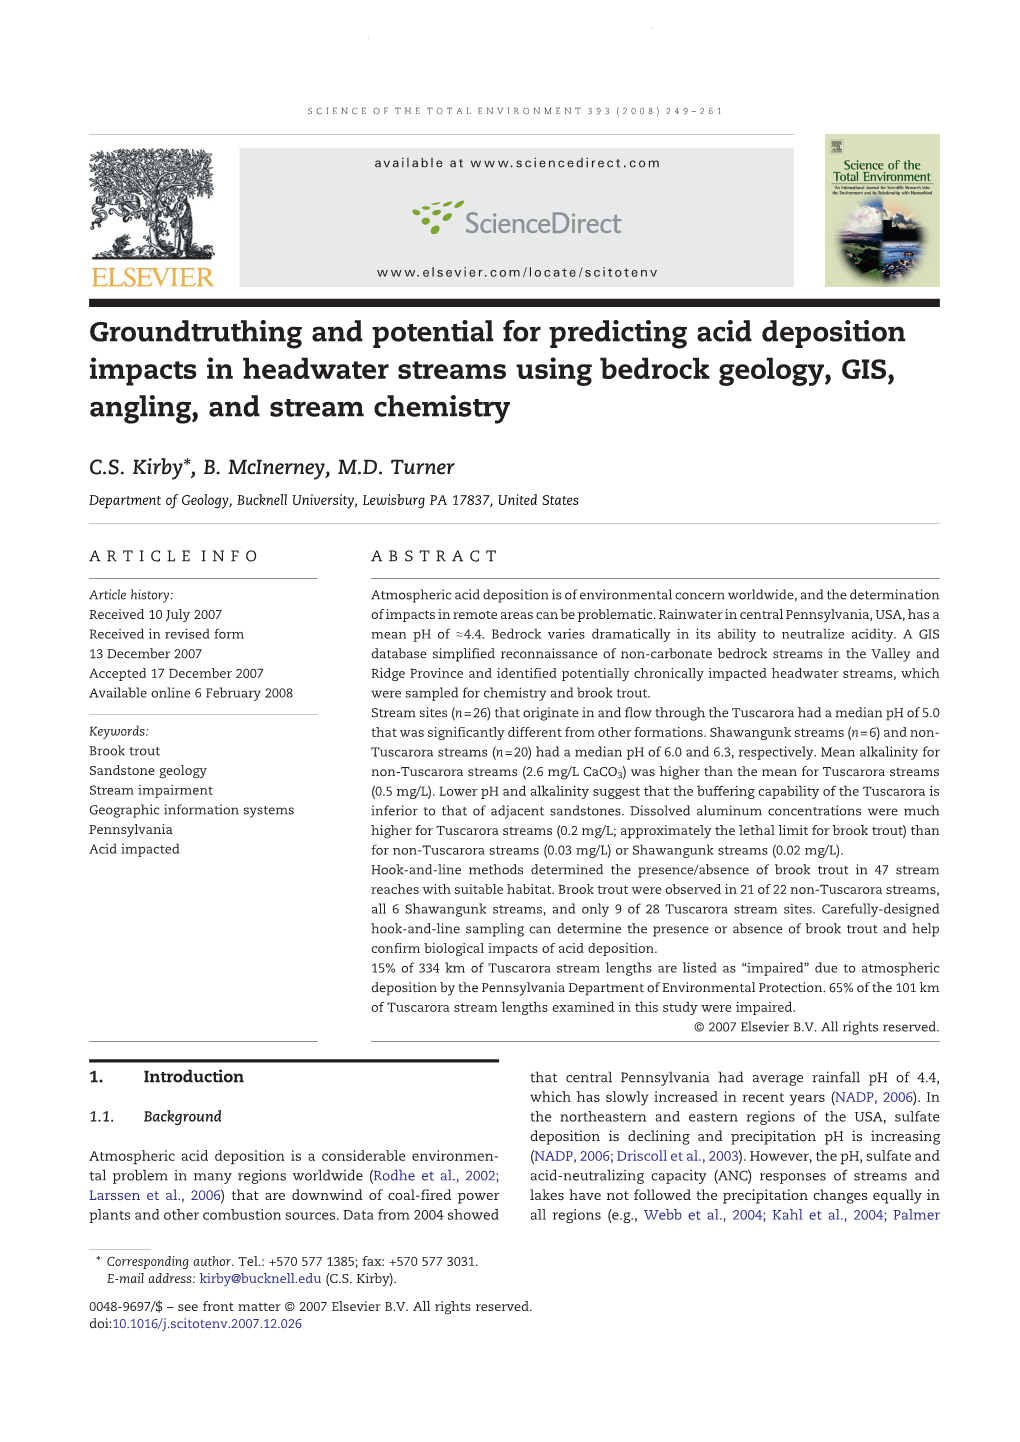 Groundtruthing and Potential for Predicting Acid Deposition Impacts in Headwater Streams Using Bedrock Geology, GIS, Angling, and Stream Chemistry